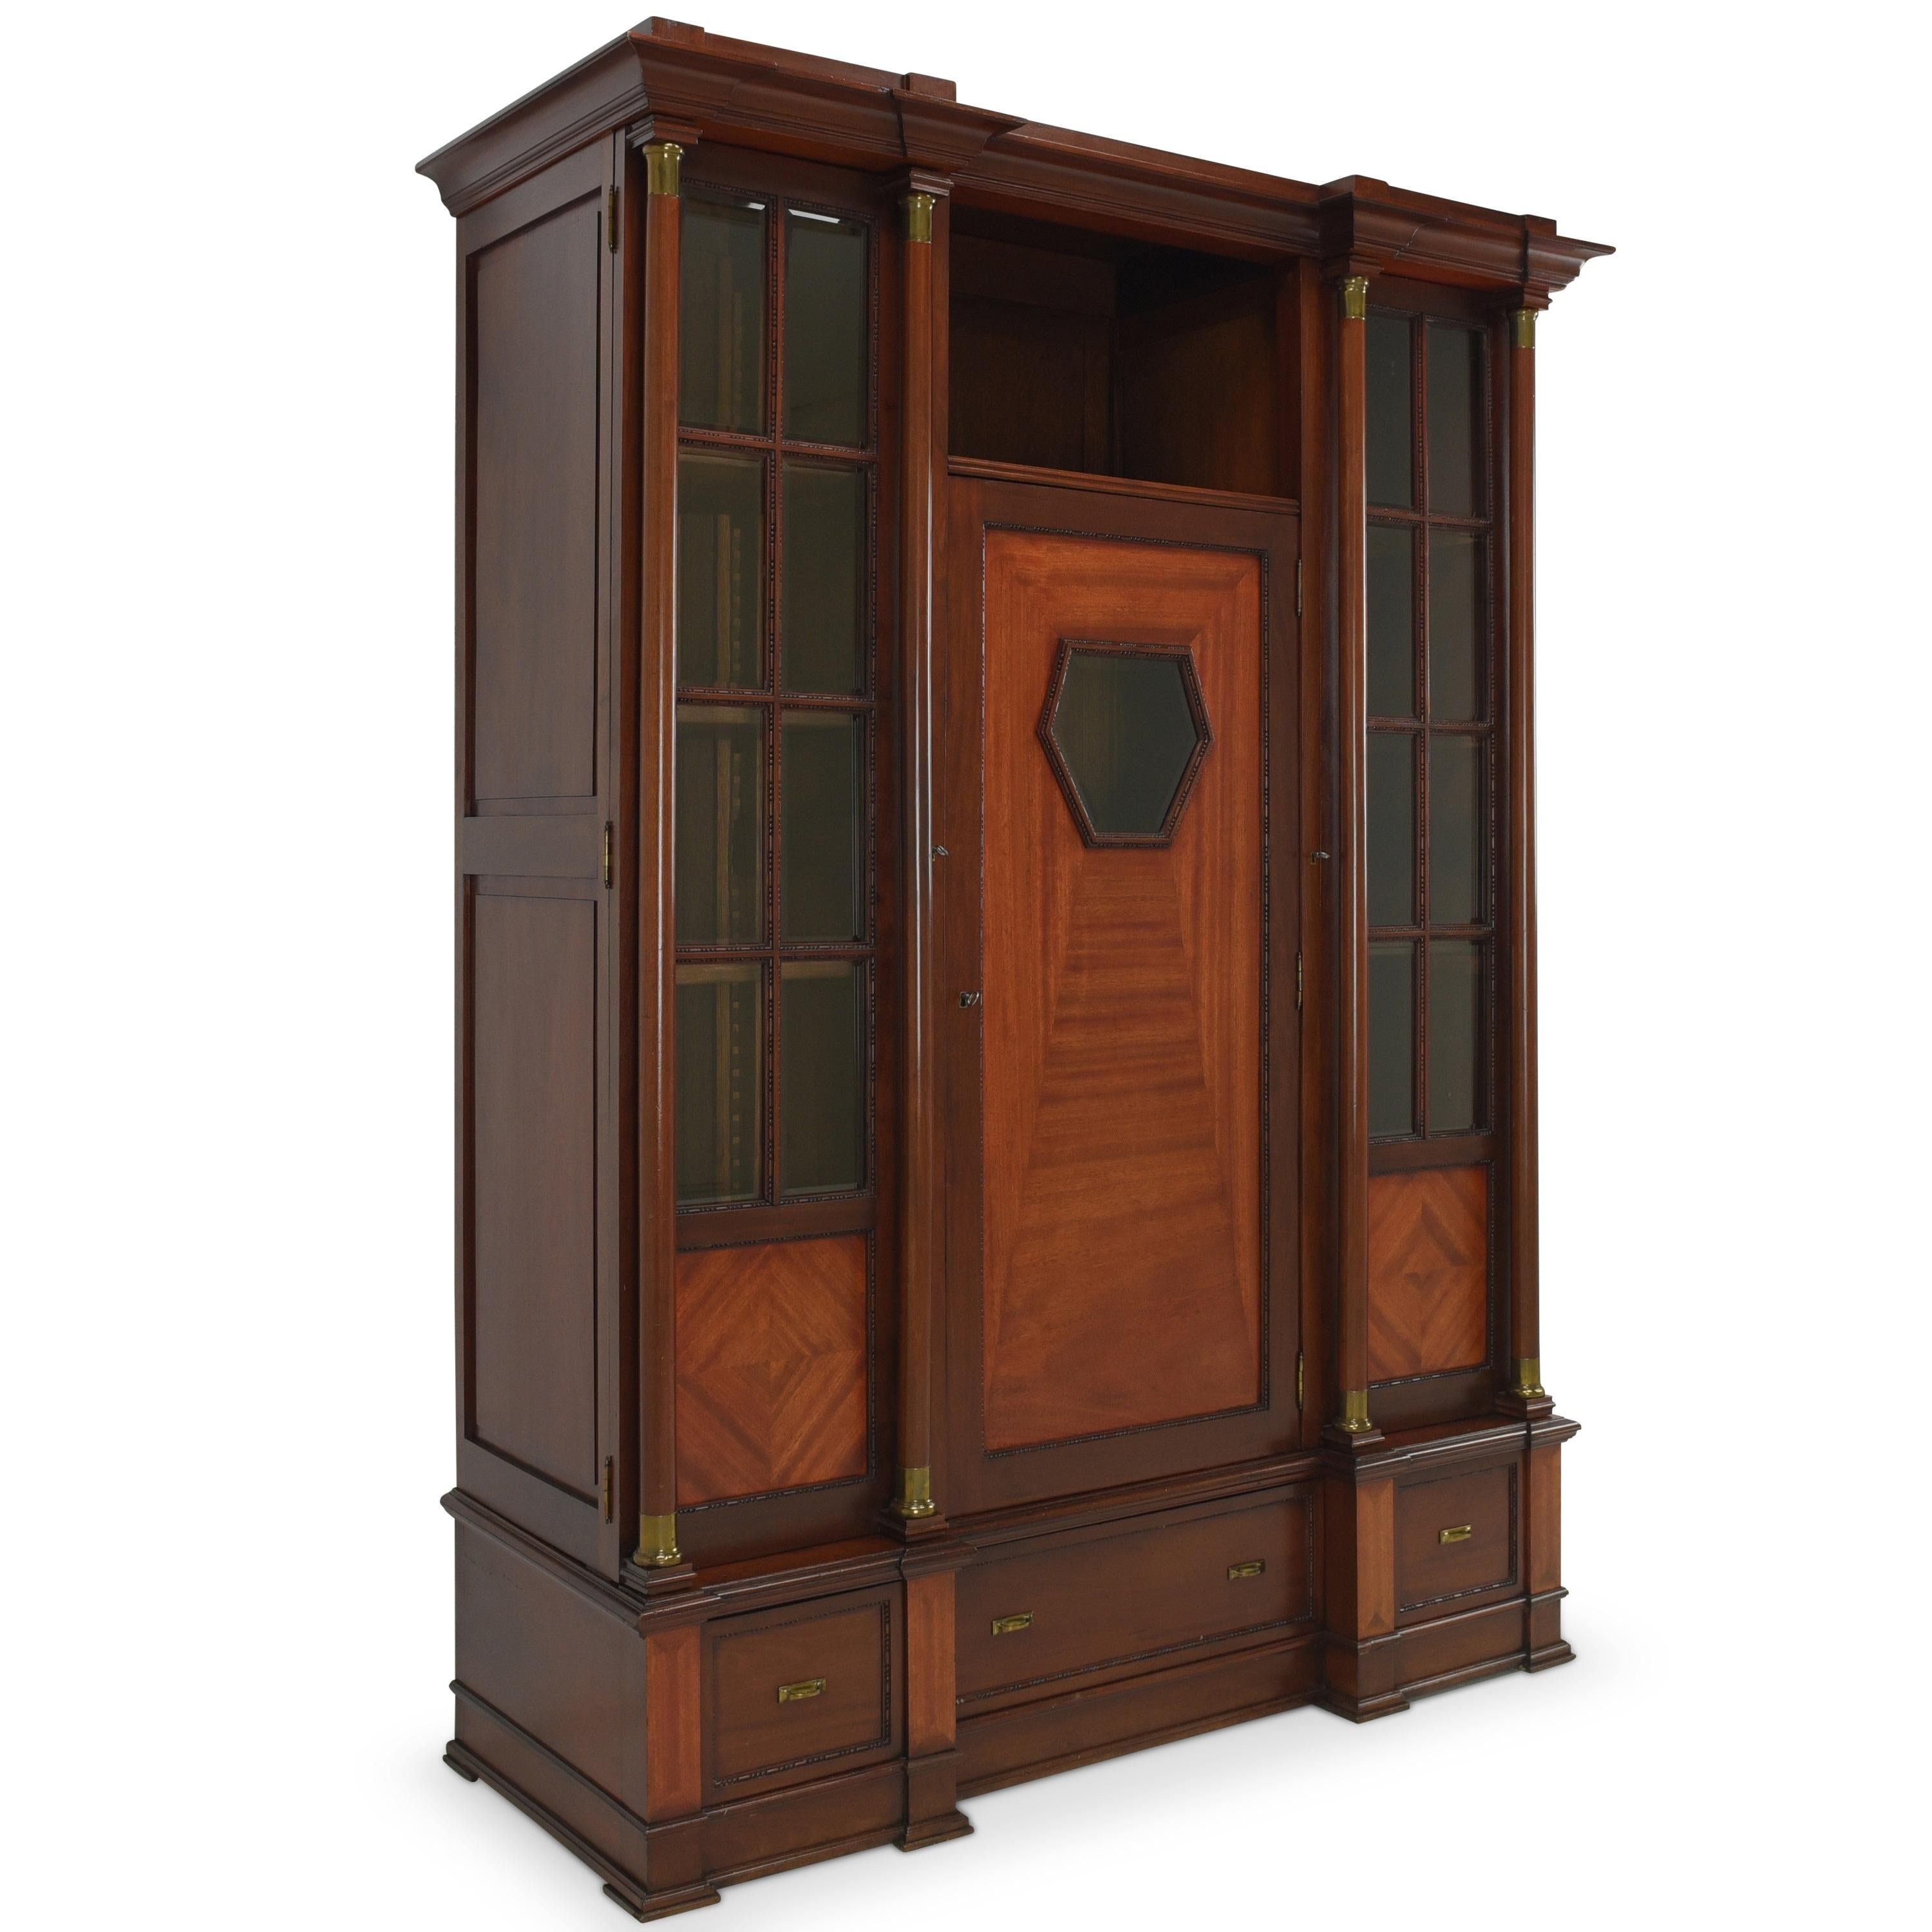 Bookcase restored Art Deco / Art Nouveau around 1920 display cabinet

Features:
Three-door model with three drawers and open compartment
Very high quality processing
Cassette fillings
Drawers pronged
Original 17-part glazing with facet